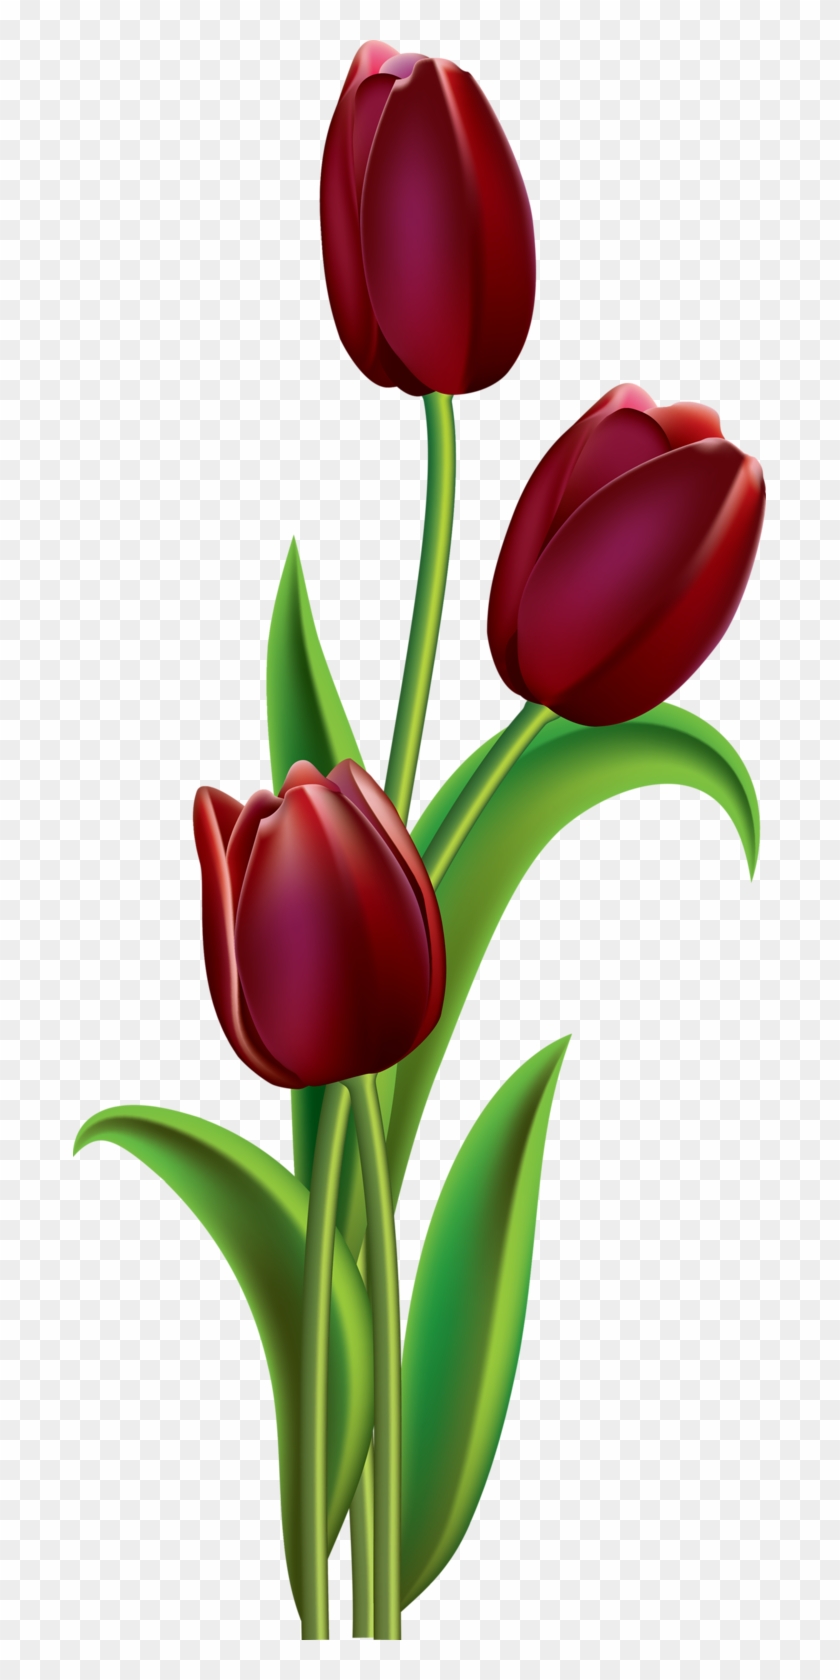 Tulip Flower Pictures Of Flowers To Draw And Paint : Finish the petals